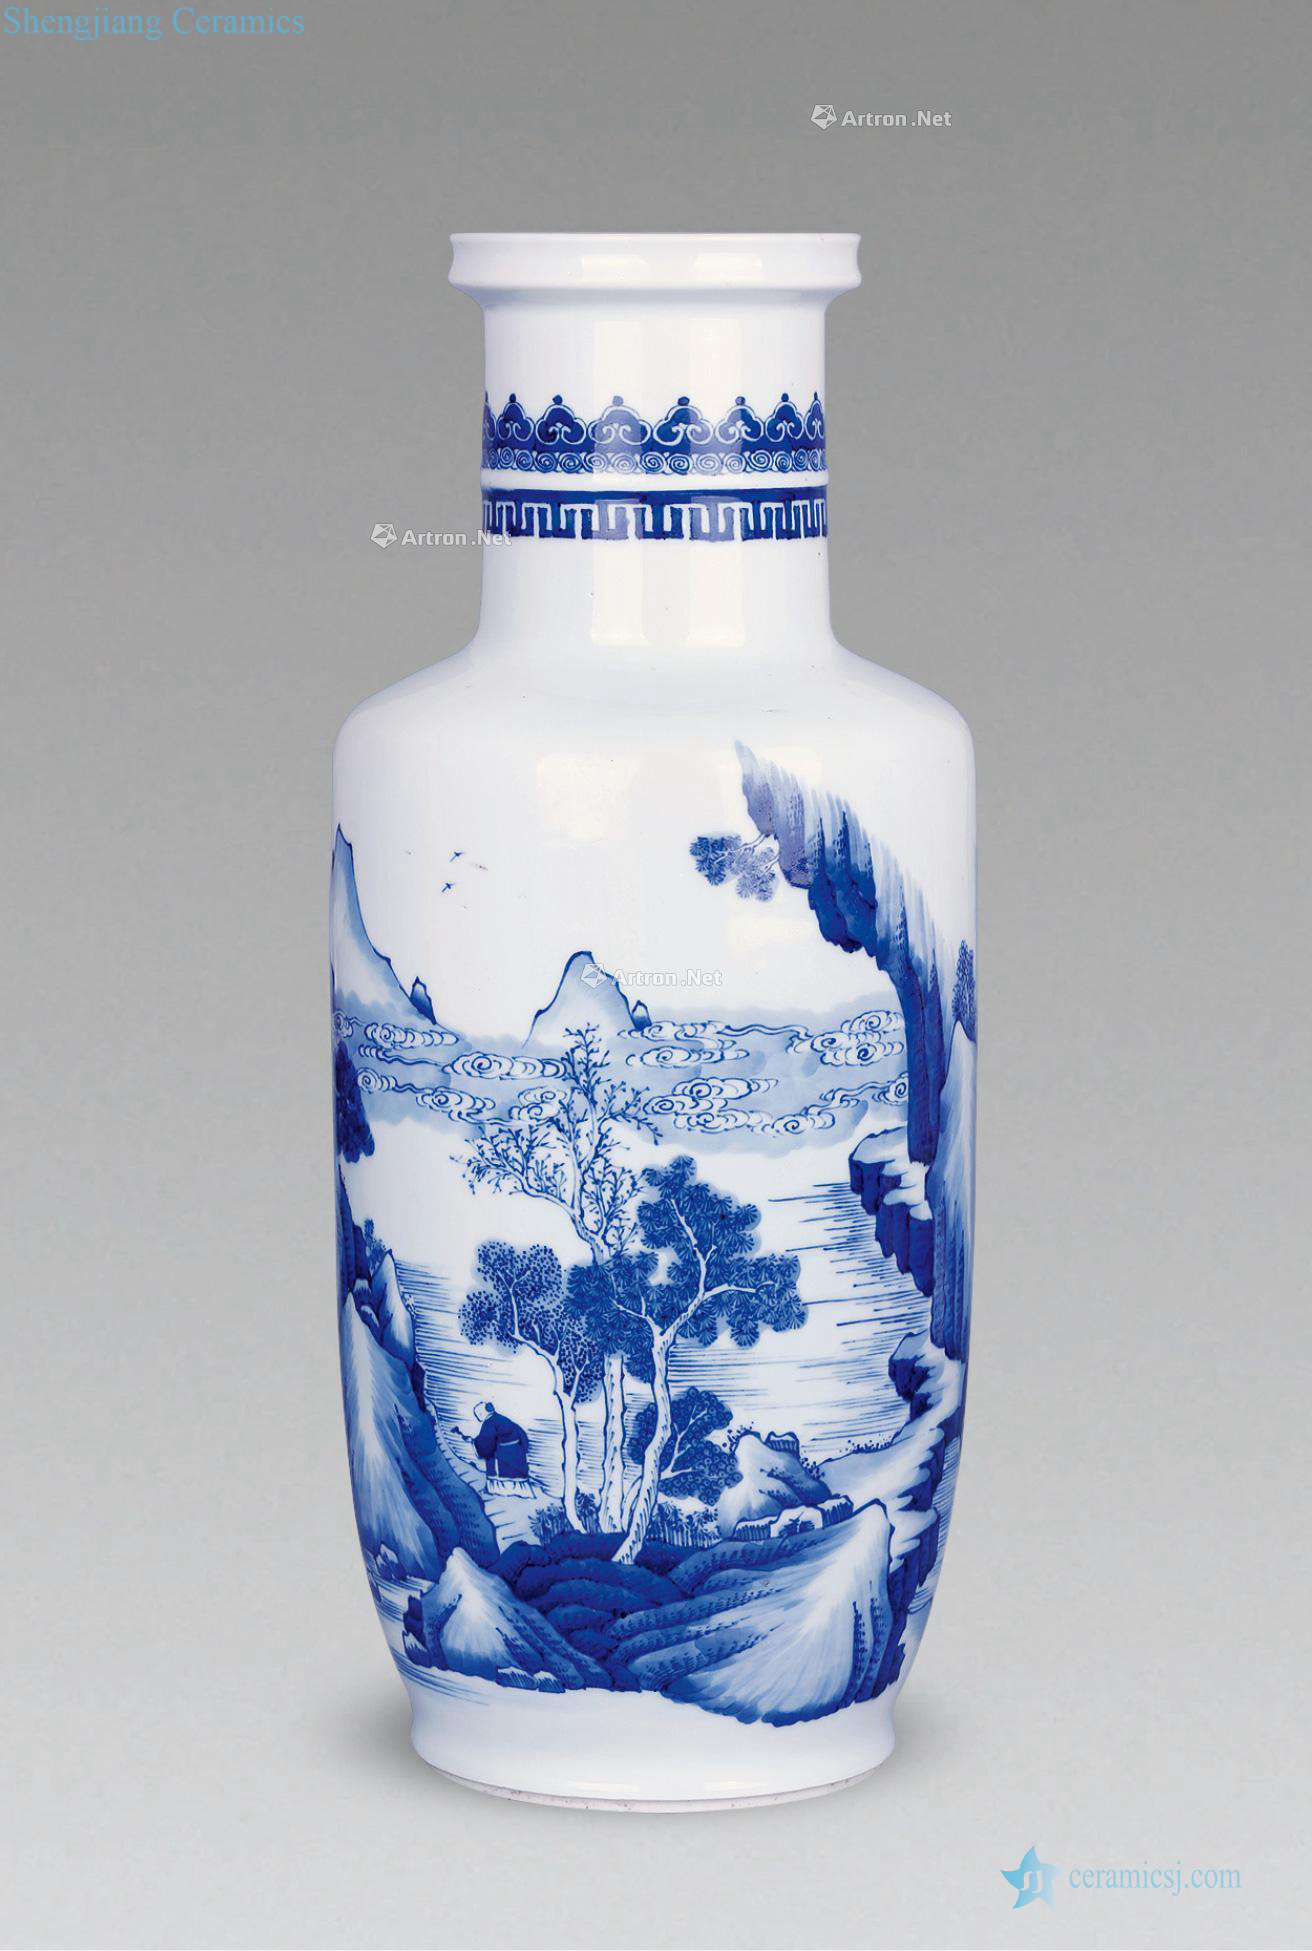 The qing emperor kangxi Blue and white landscape characters were bottles of (a)